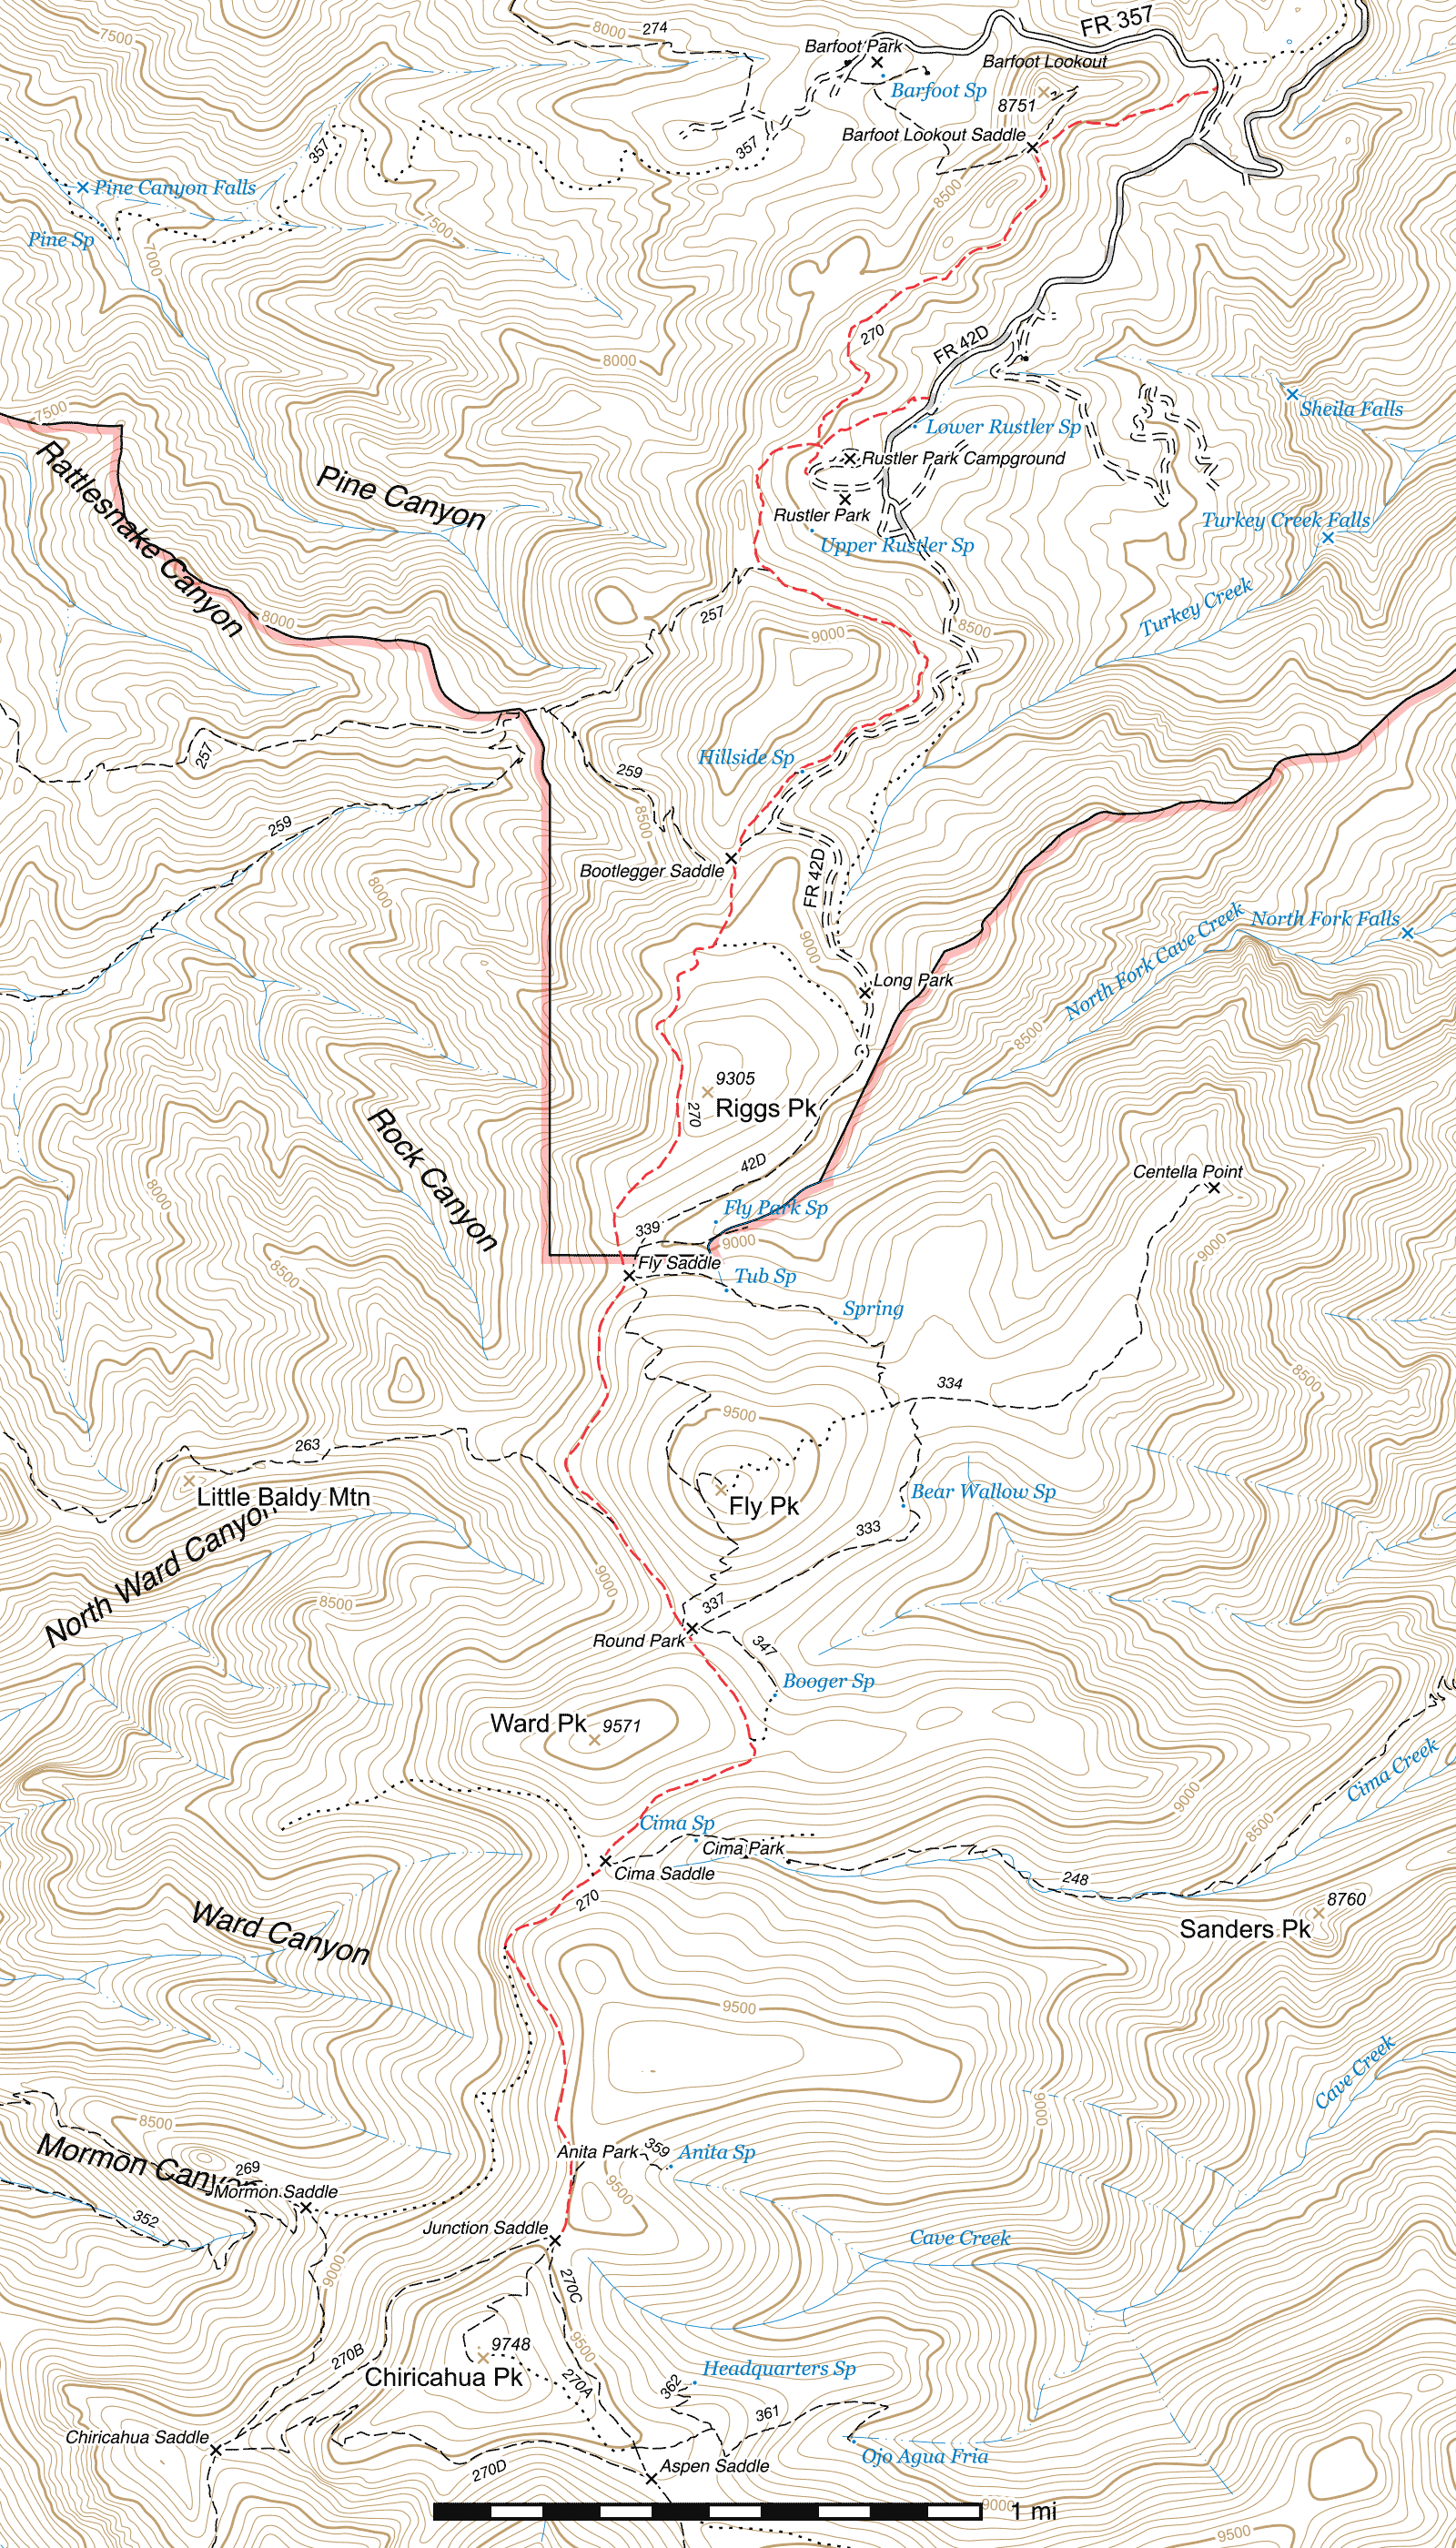 Topographic map of Crest Trail - FR 357 to Junction Saddle #270